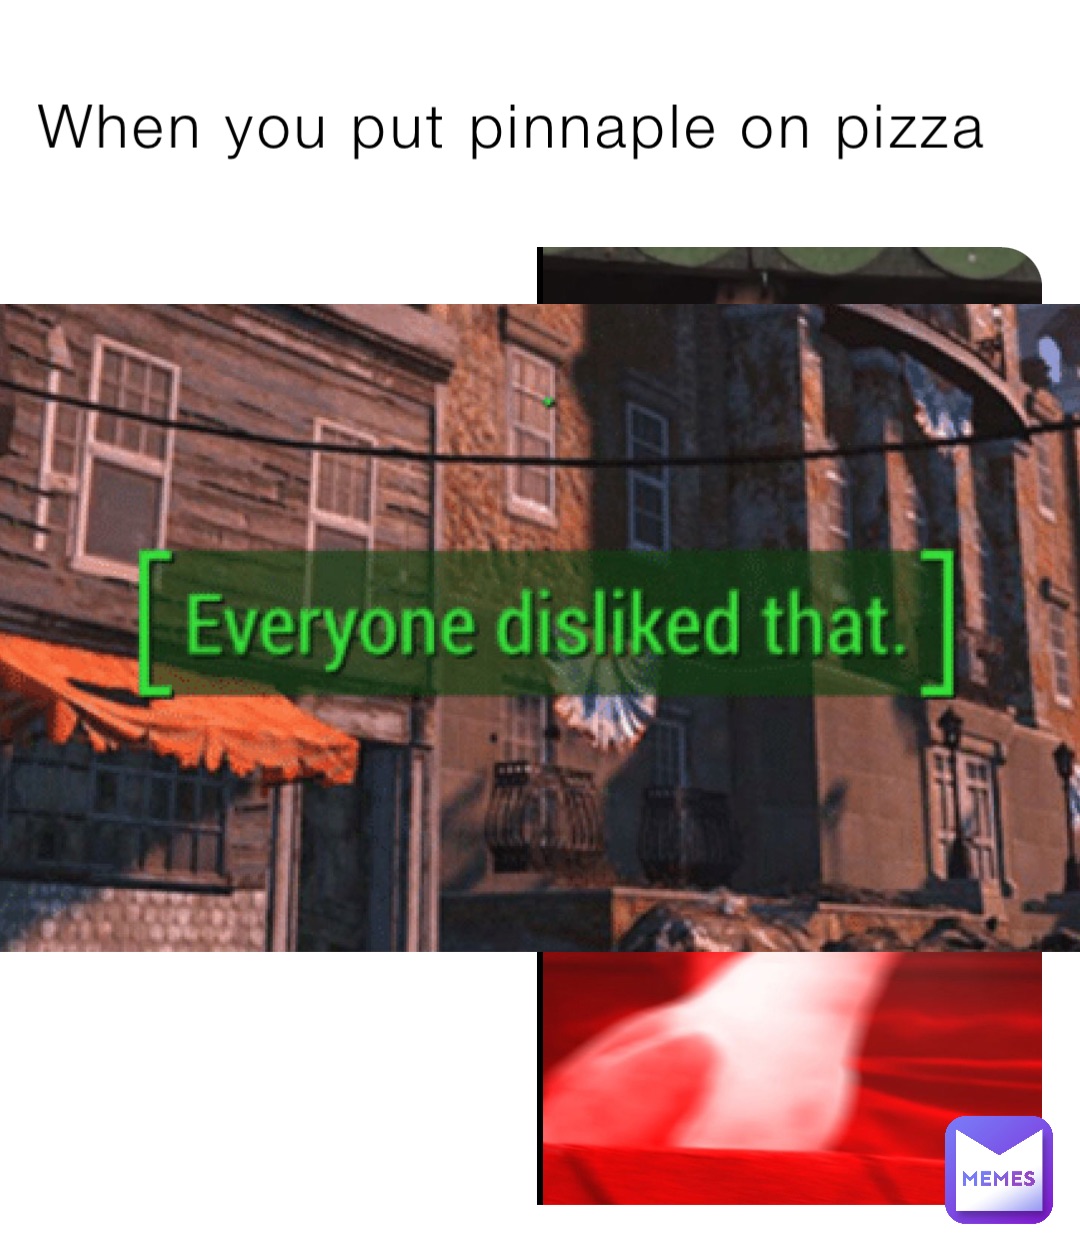 When you put pinnaple on pizza